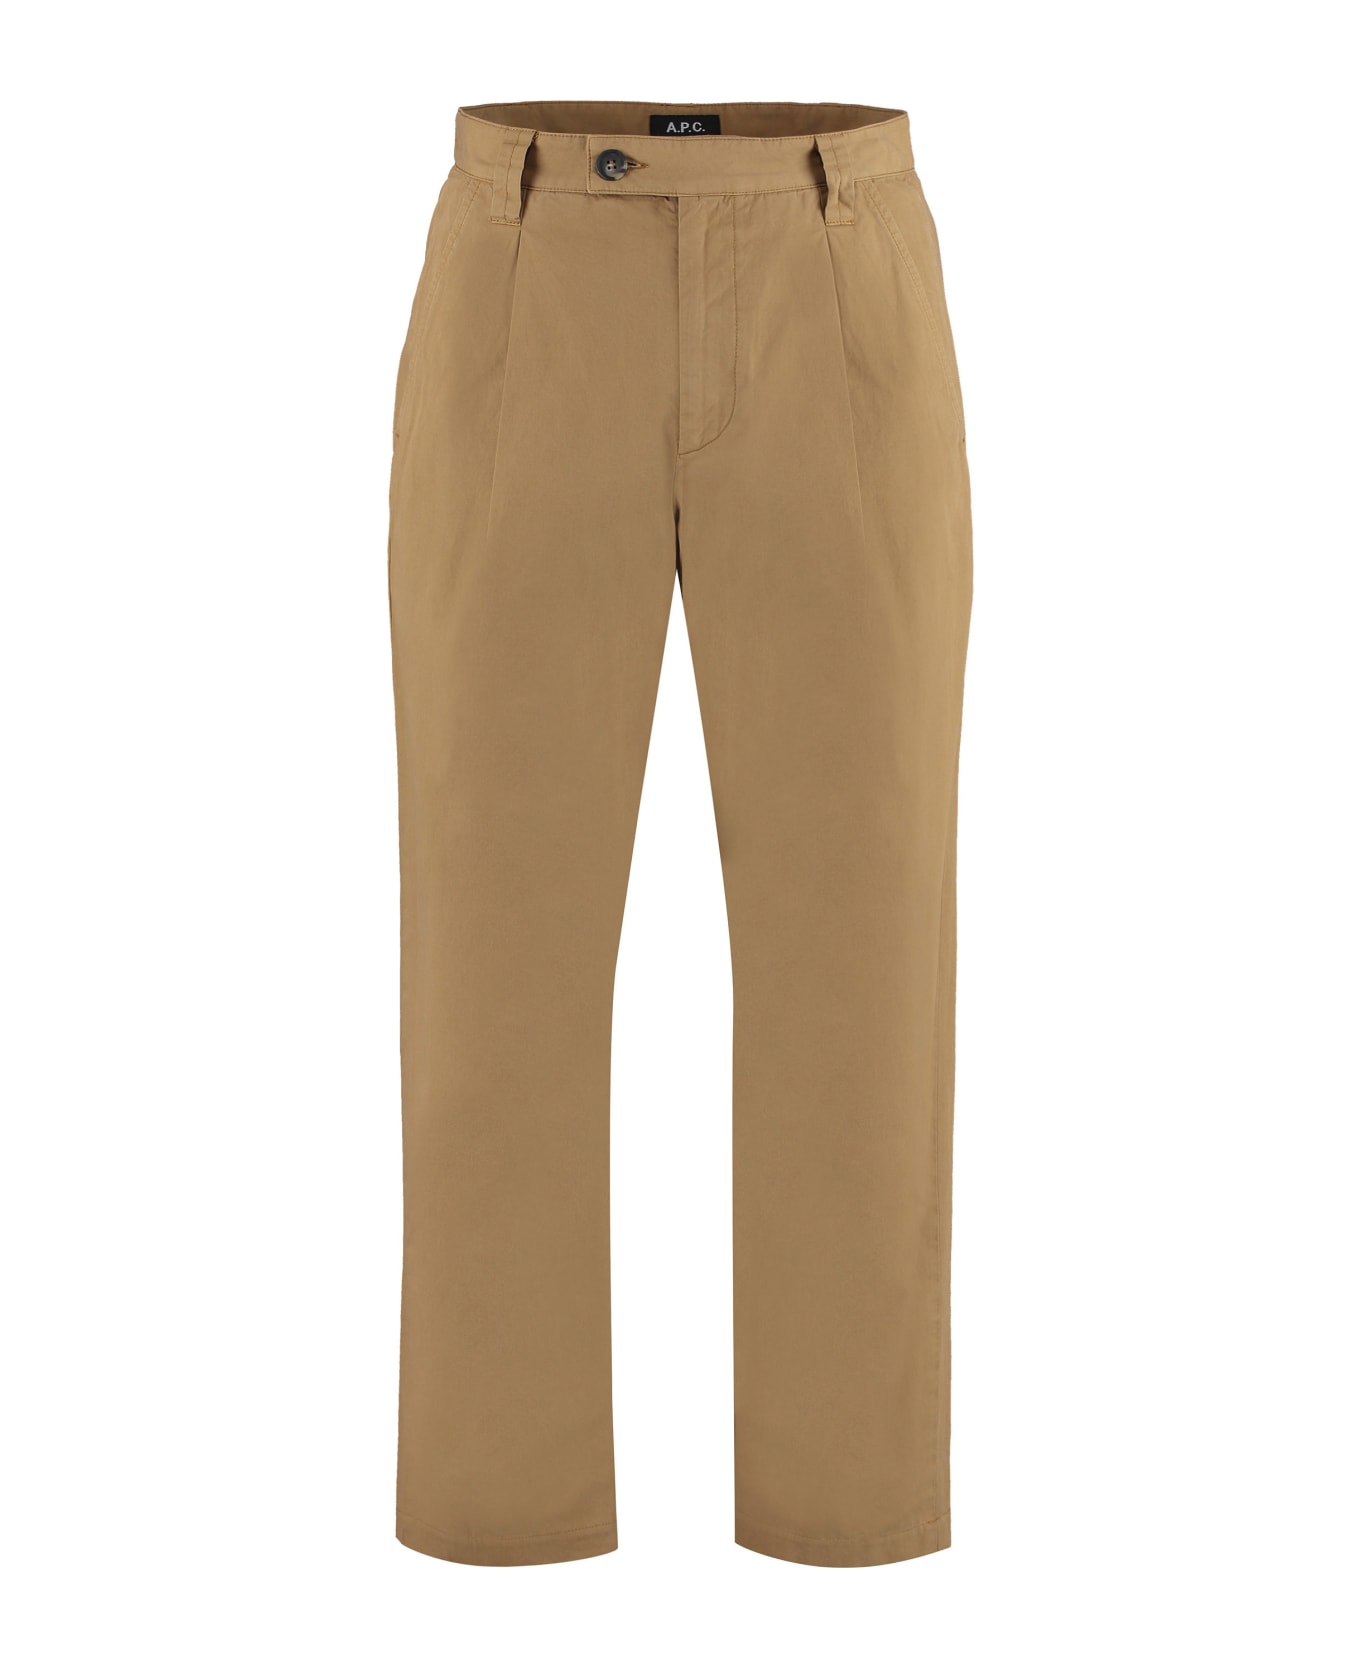 A.P.C. Cotton Chino Trousers - Cag Tabac name:467